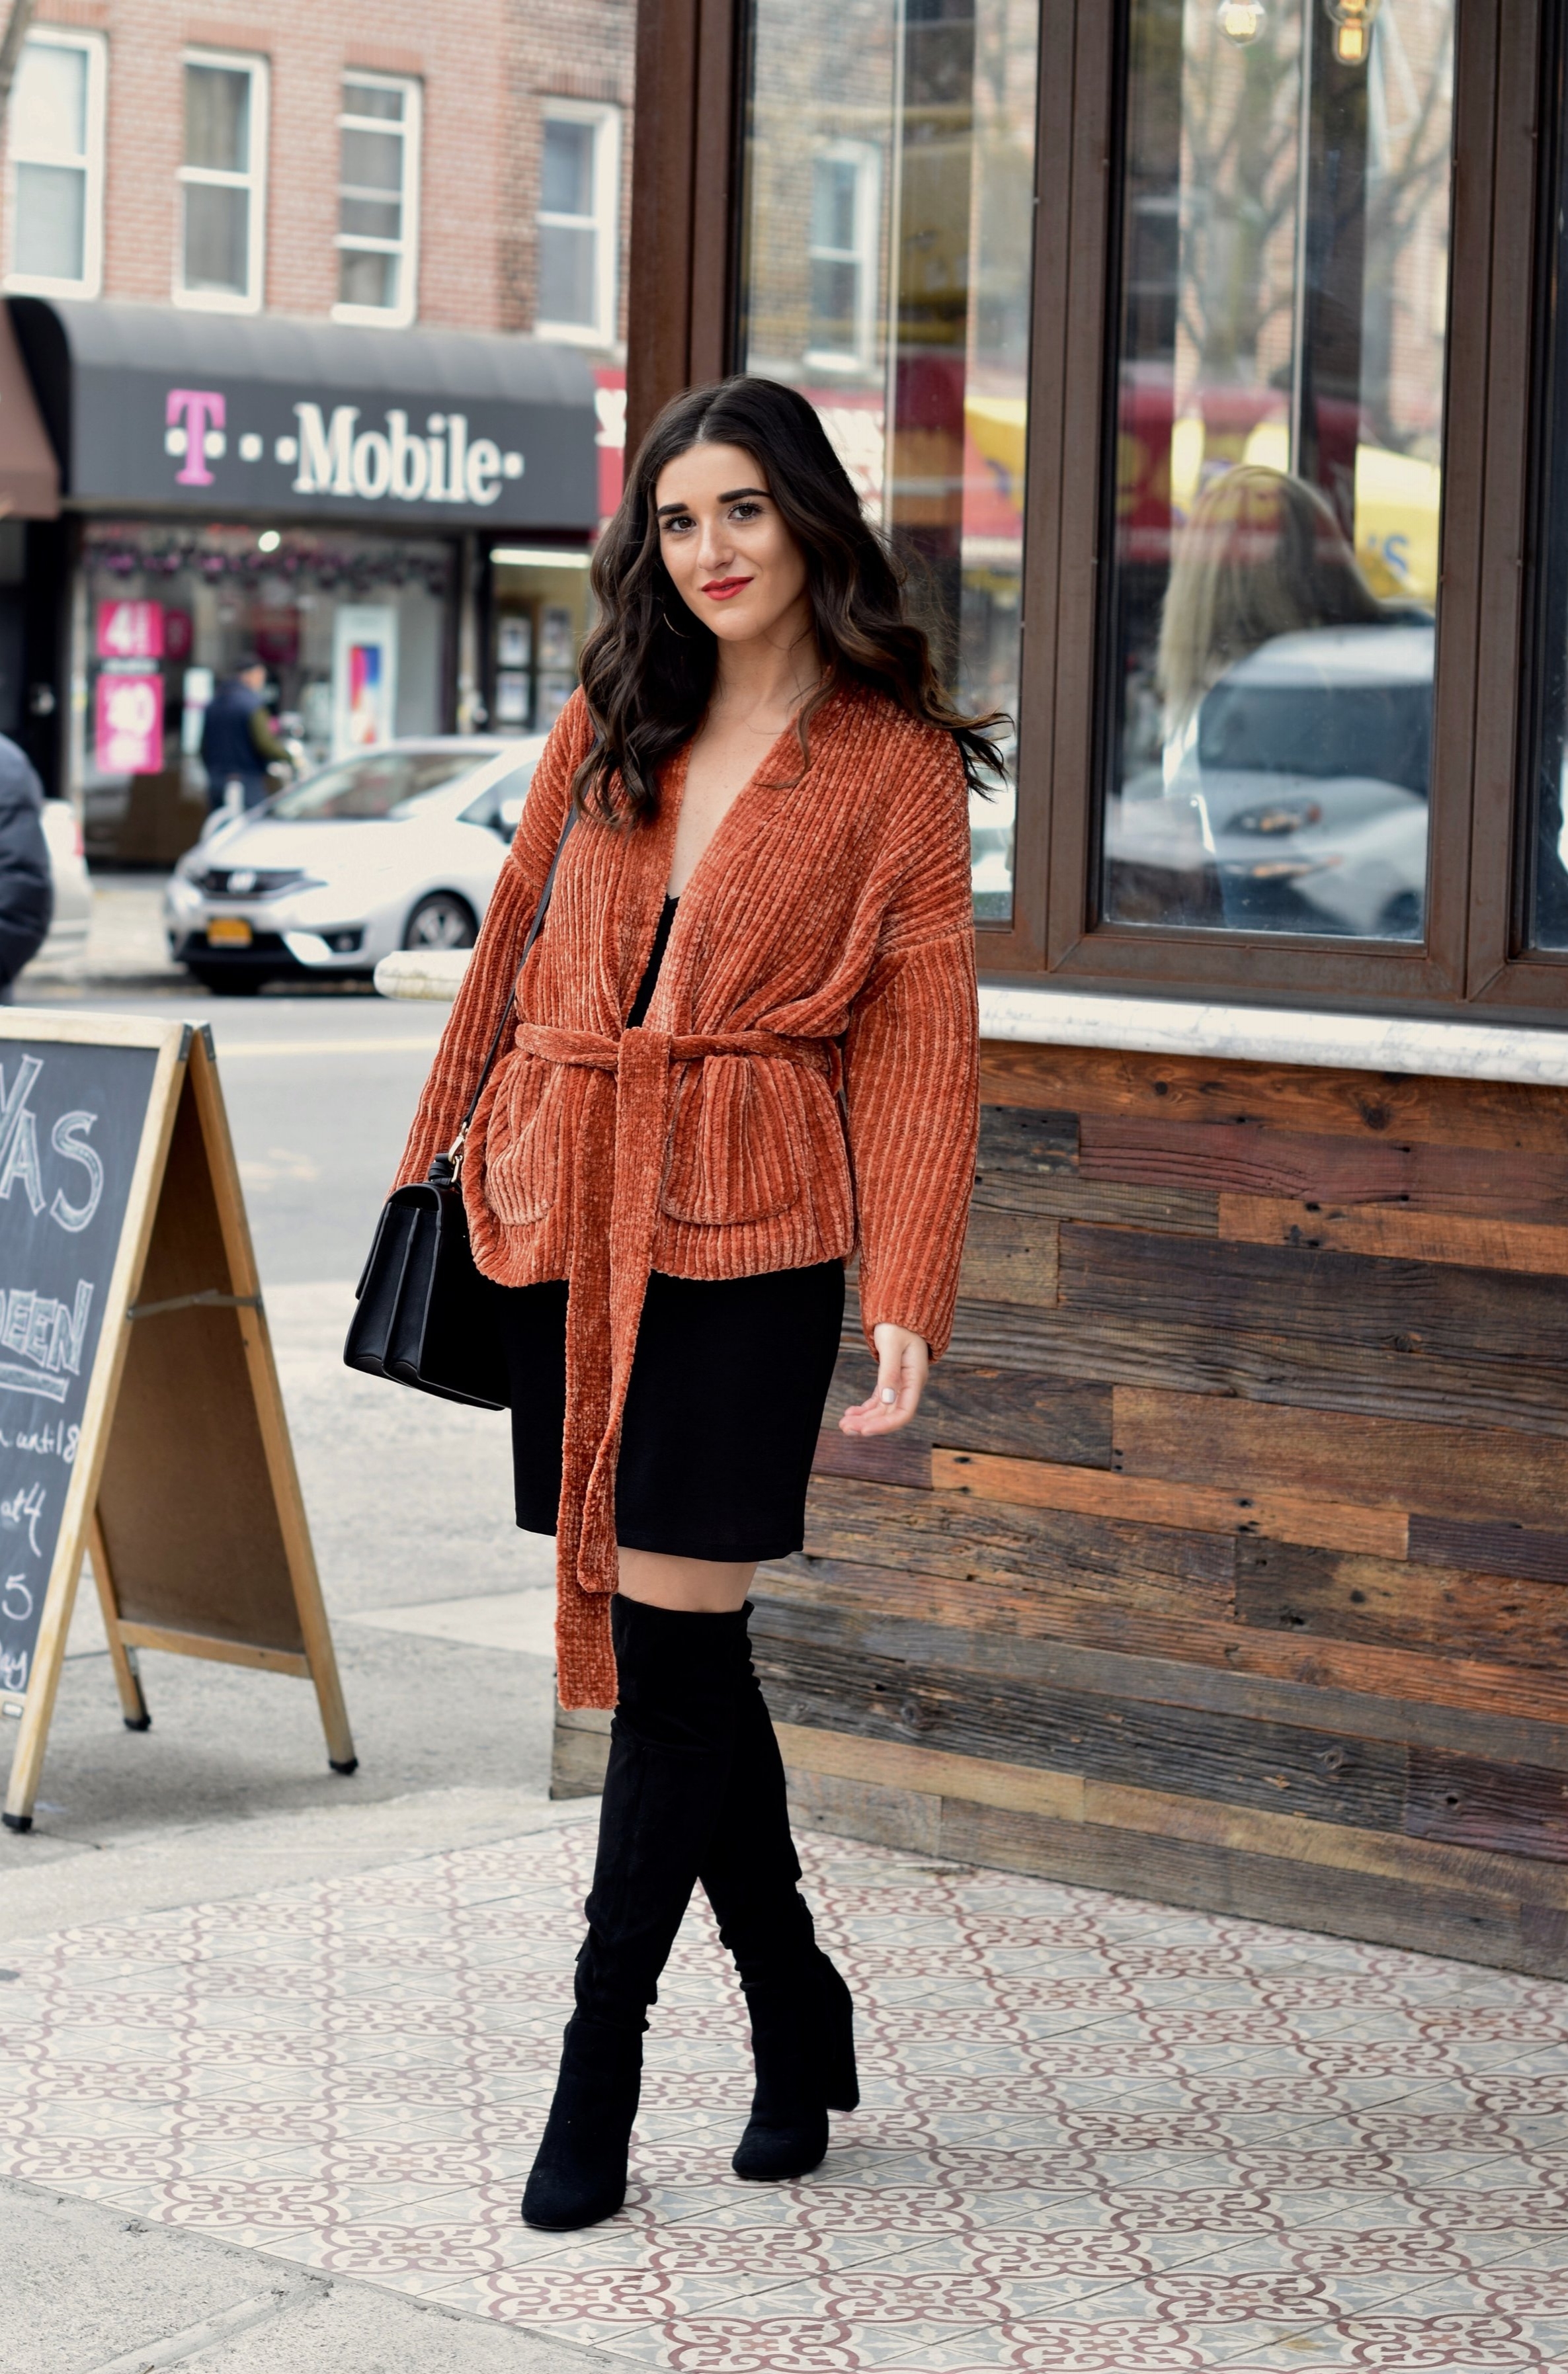 Orange Tie Sweater OTK Boots 10 Sweaters That Make The Perfect Holiday Gifts Esther Santer Fashion Blog NYC Street Style Blogger Outfit OOTD Trendy Urban Outfitters Girl Women Black Over The Knee Boots Slip Dress Beautiful New York City Cozy OOTD.jpg